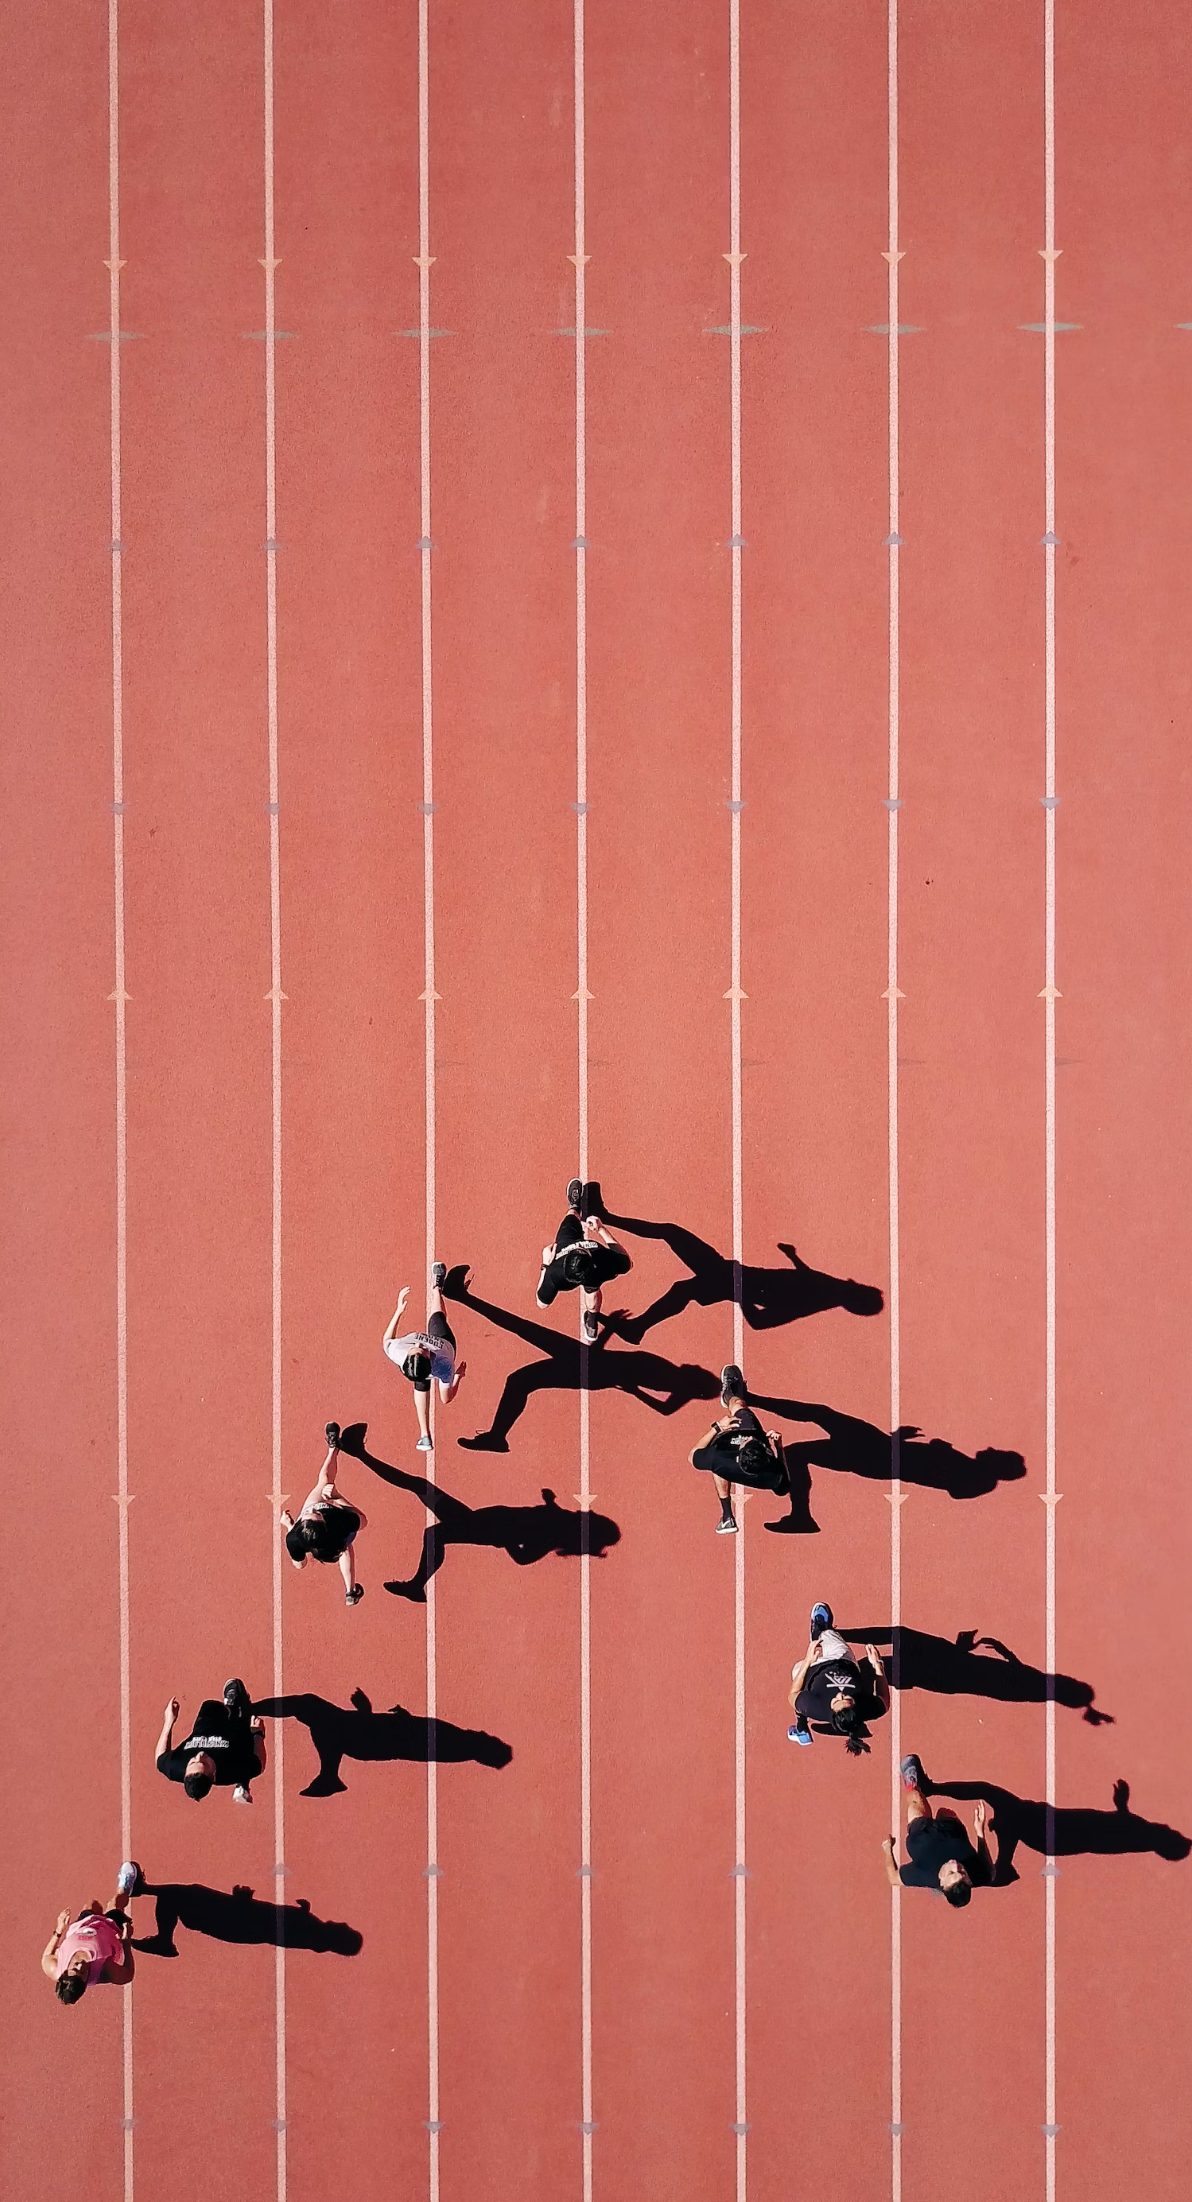 8 people running in an arrow formation on a track